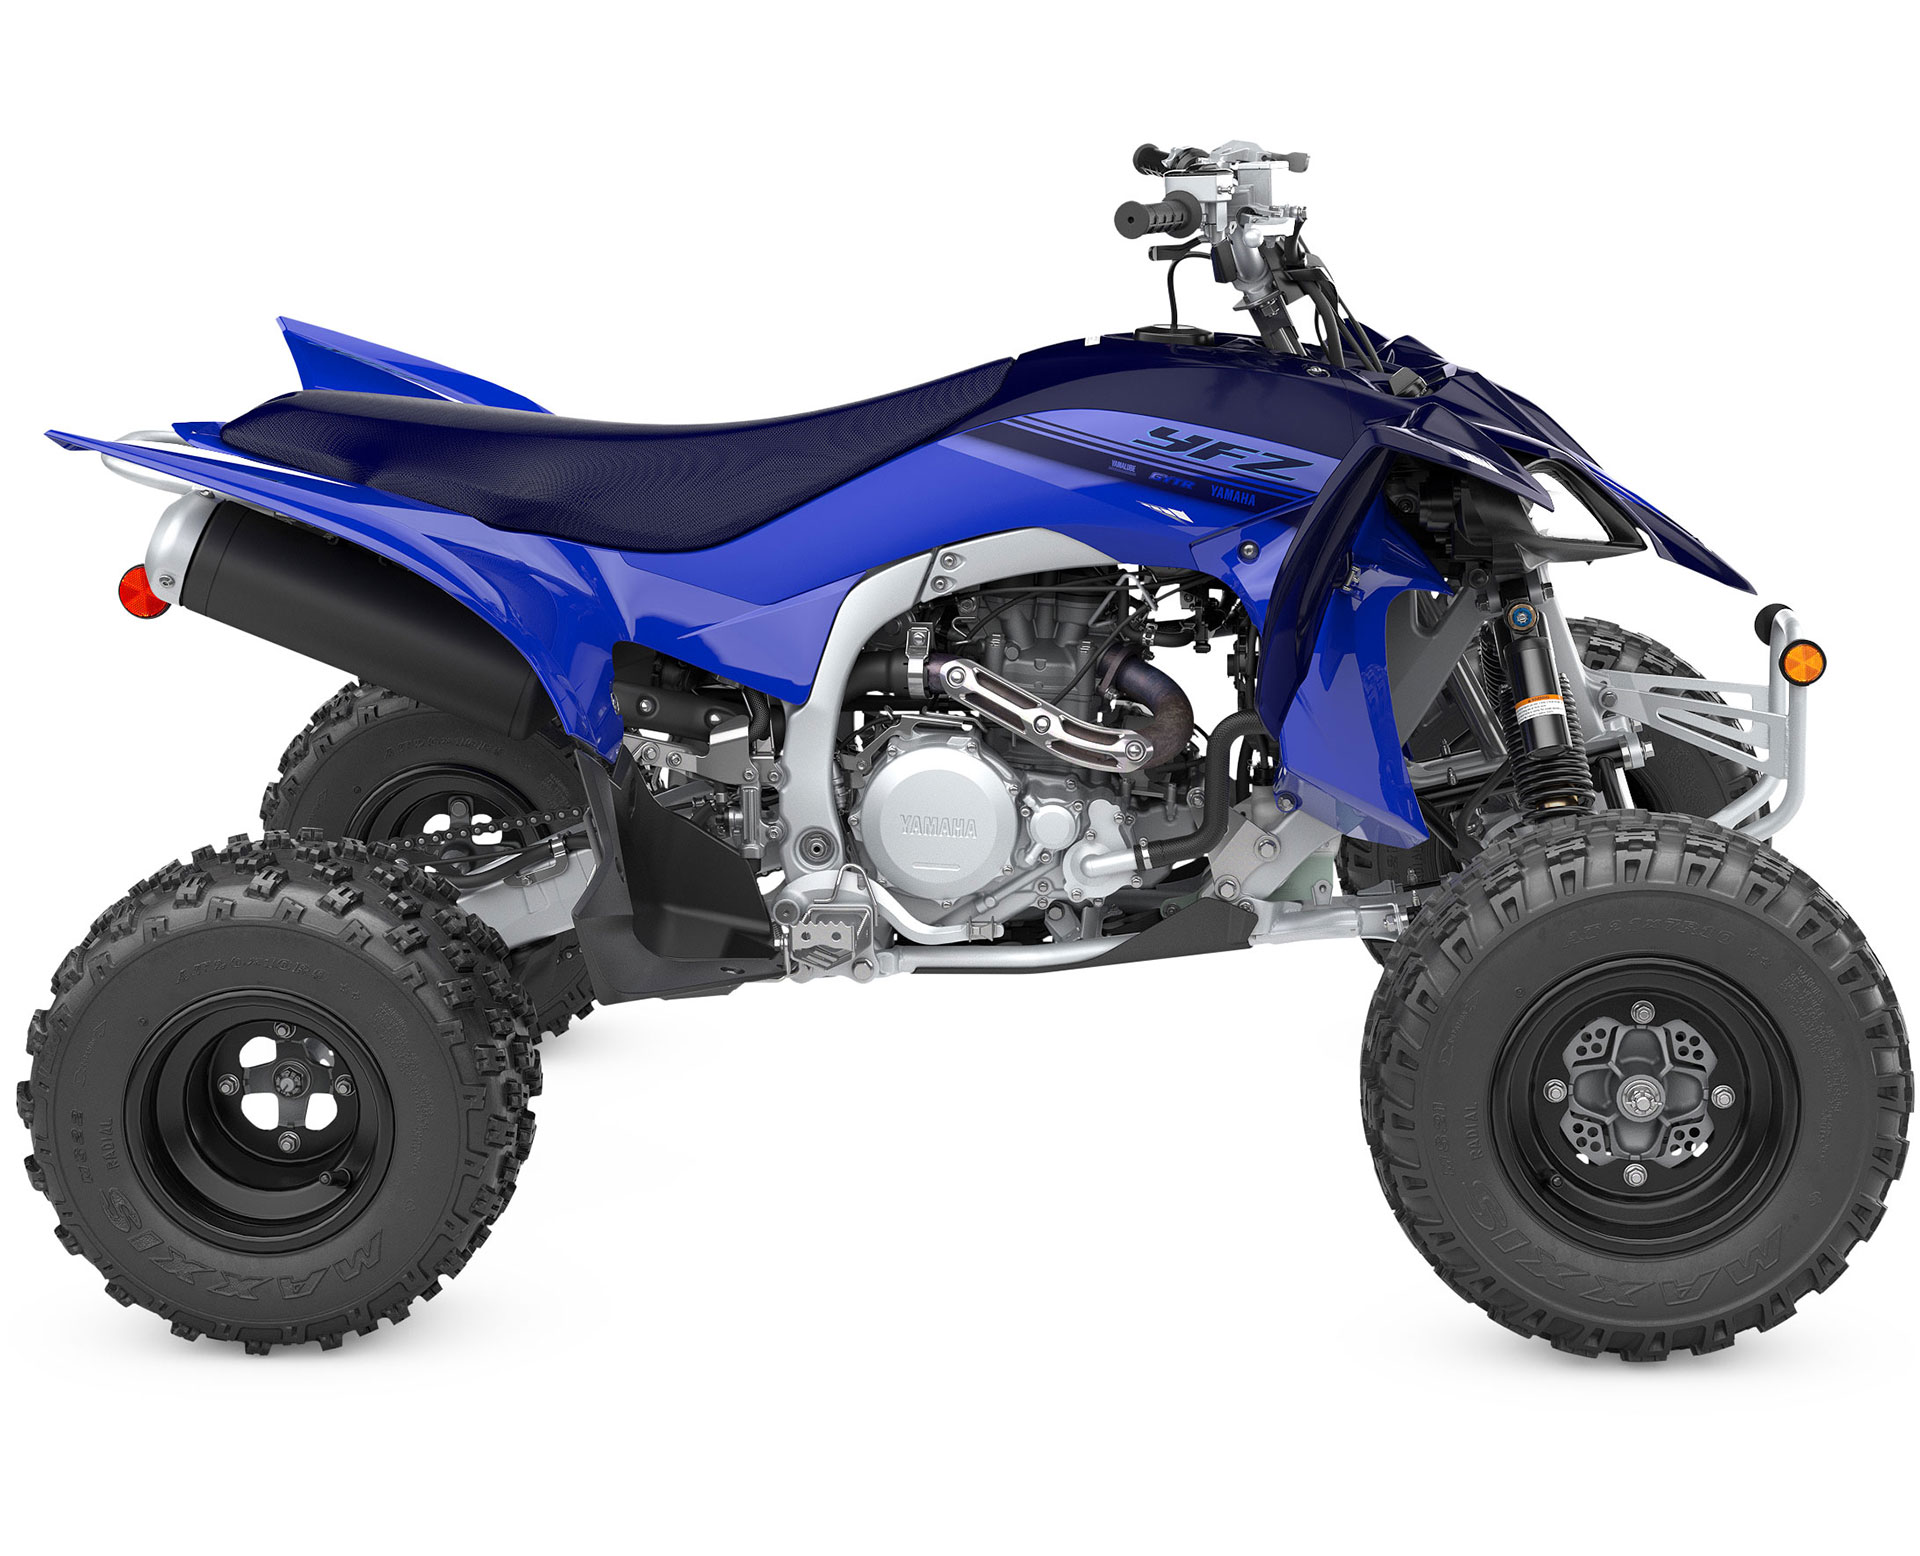 Thumbnail of your customized YFZ450R 2024